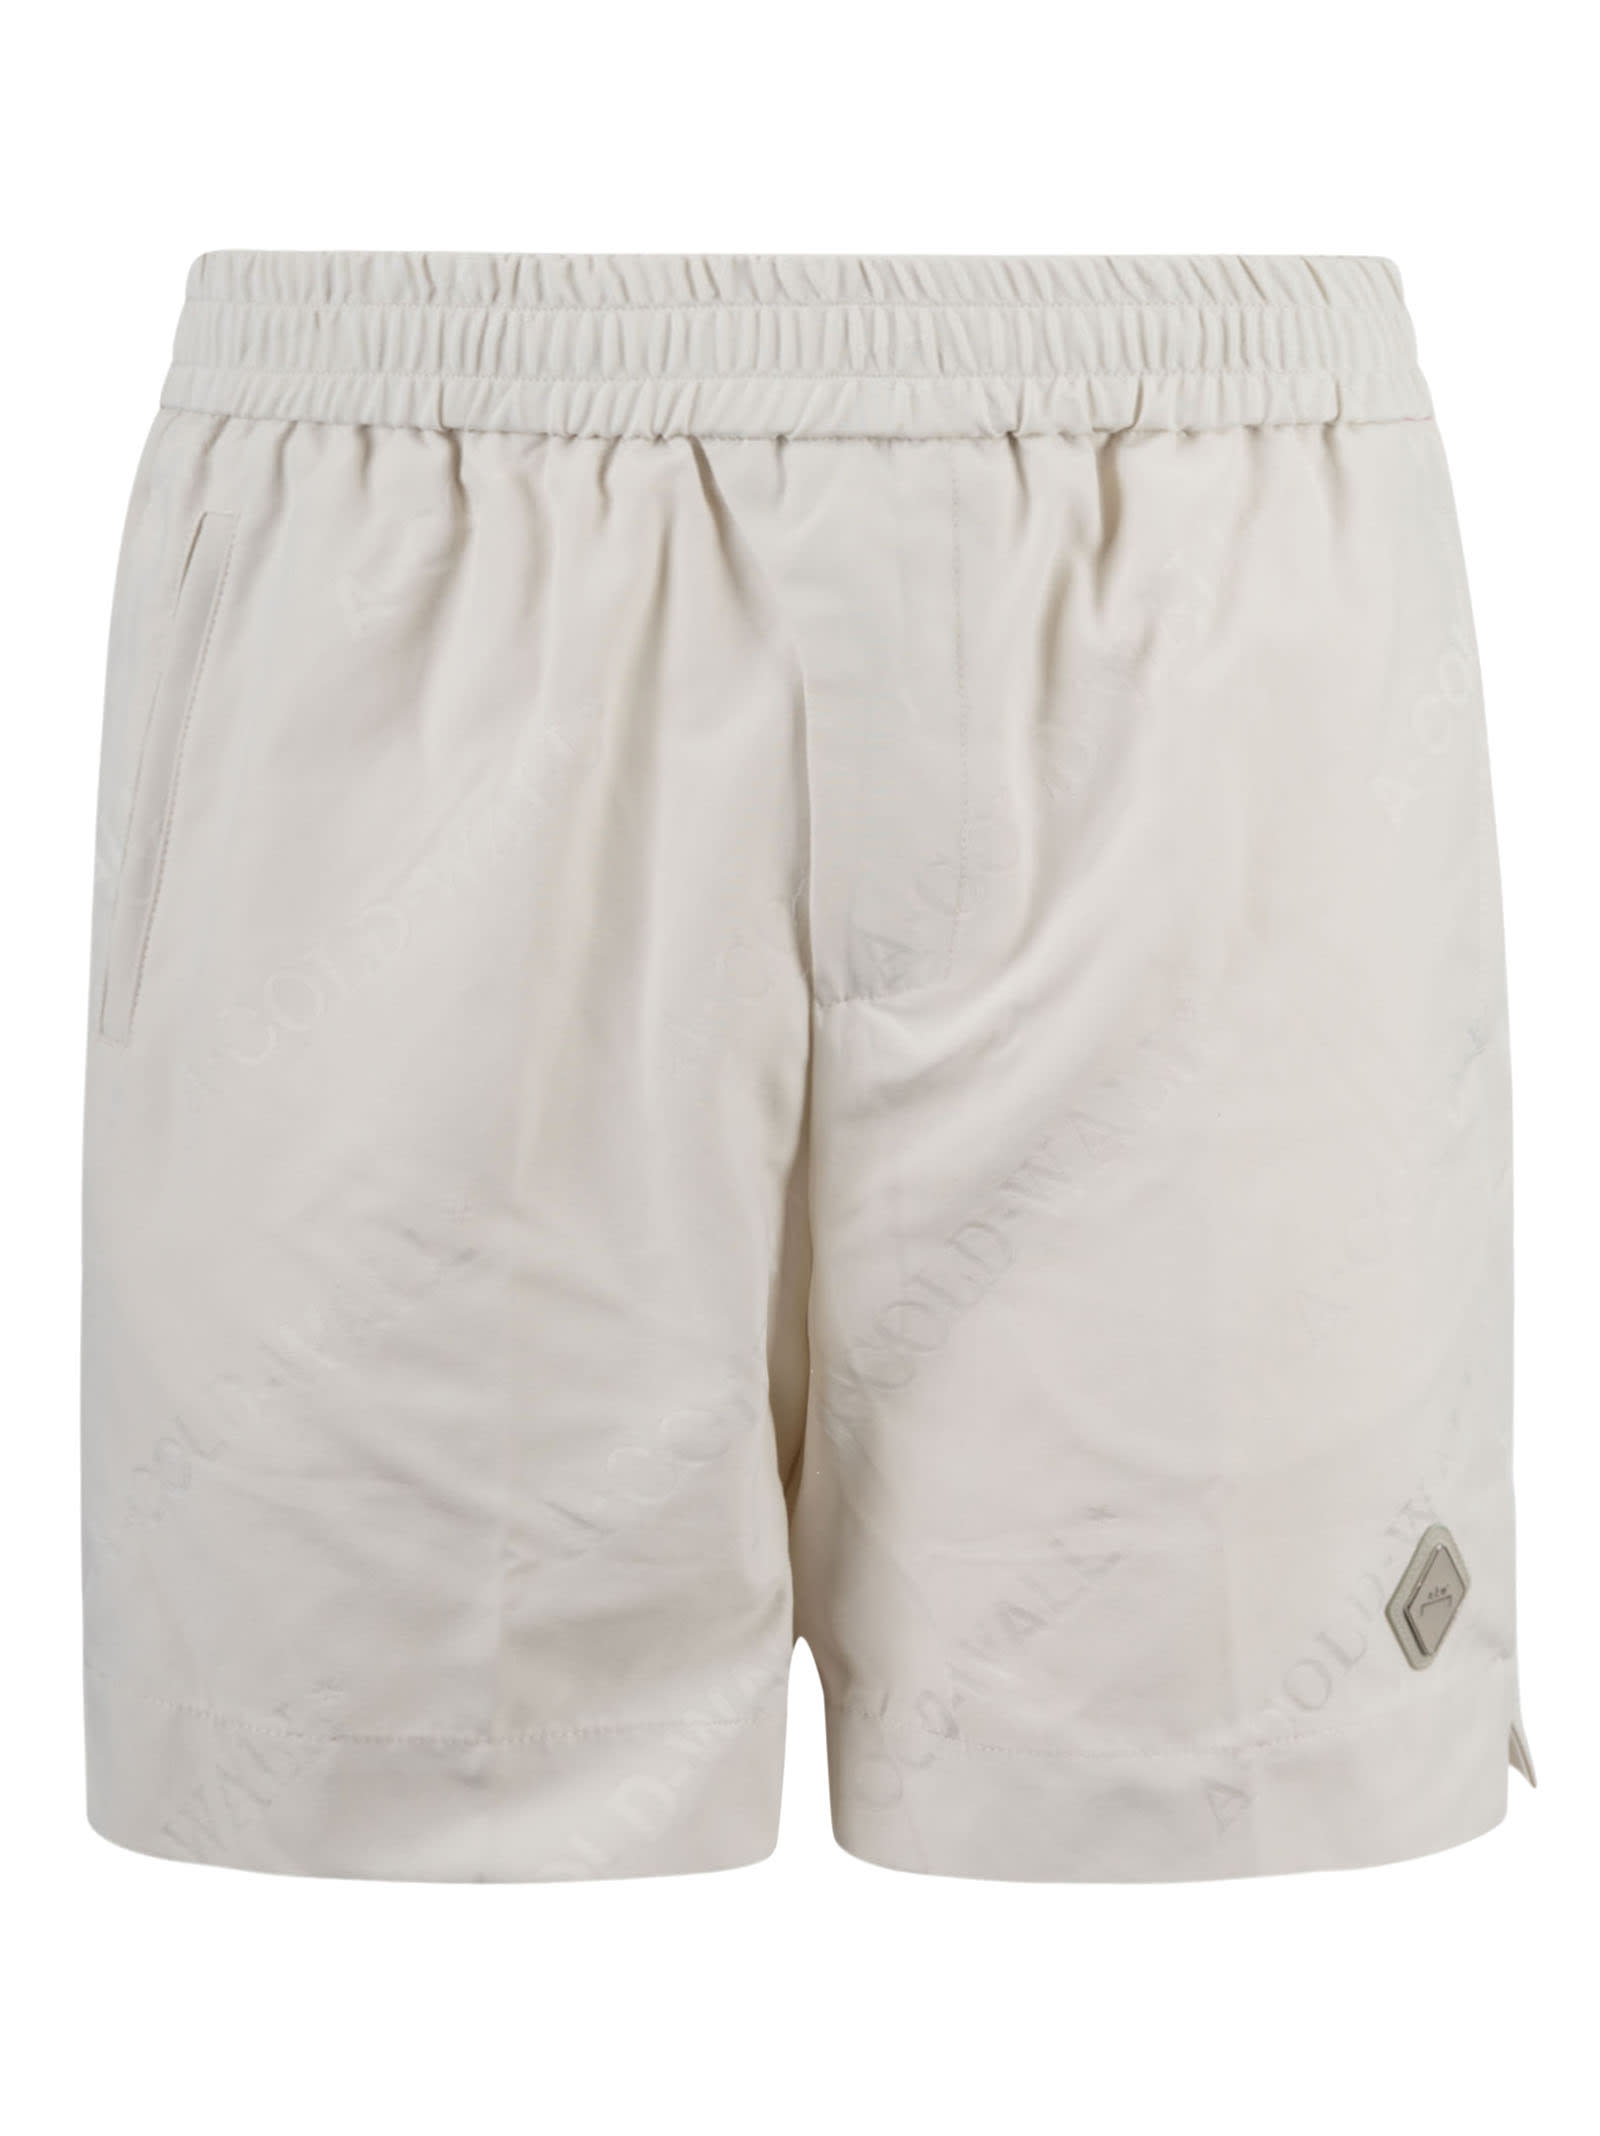 A-COLD-WALL Logo Patch Shorts